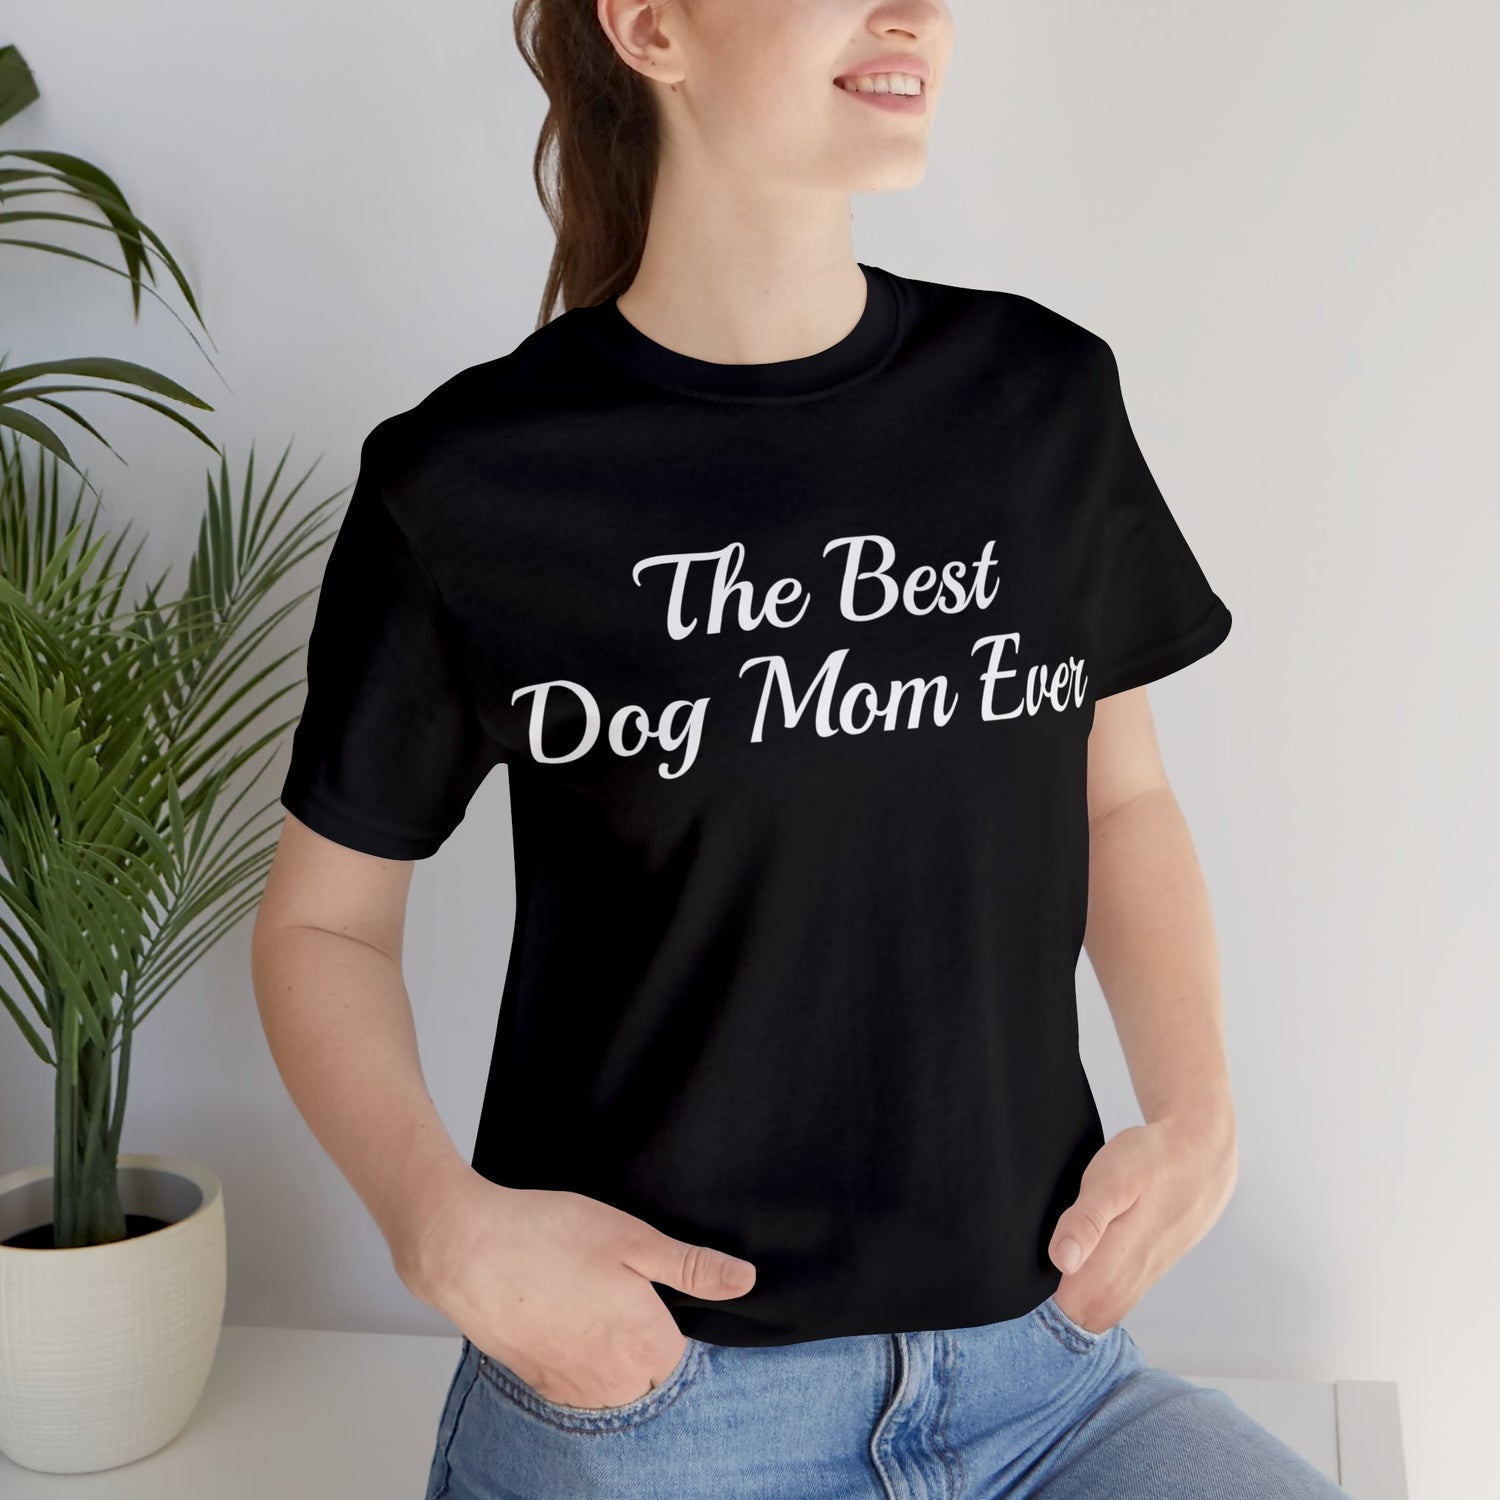 Best Dog Mom Canine Companion Cotton Crew neck Dog Lover dog lover gifts Dog Mom Dog Mom Adventures Dog Mom Apparel Dog Mom Essentials Dog Mom Fashion Dog Mom Goals Dog Mom Happiness Dog Mom Life Dog Mom Life Goals Dog Mom Life Is Ruff Dog Mom Lifestyle Dog Mom Power Dog Mom Pride Dog Mom Squad Dog Mom Tribe Dog Mom Vibes Dog Momma Dog Parenting Dog tshirts Fur Baby Bond Fur Baby Love Meaningful Gift Pawfectly Devoted Stylish Comfort T-shirts Unconditional Love Unisex